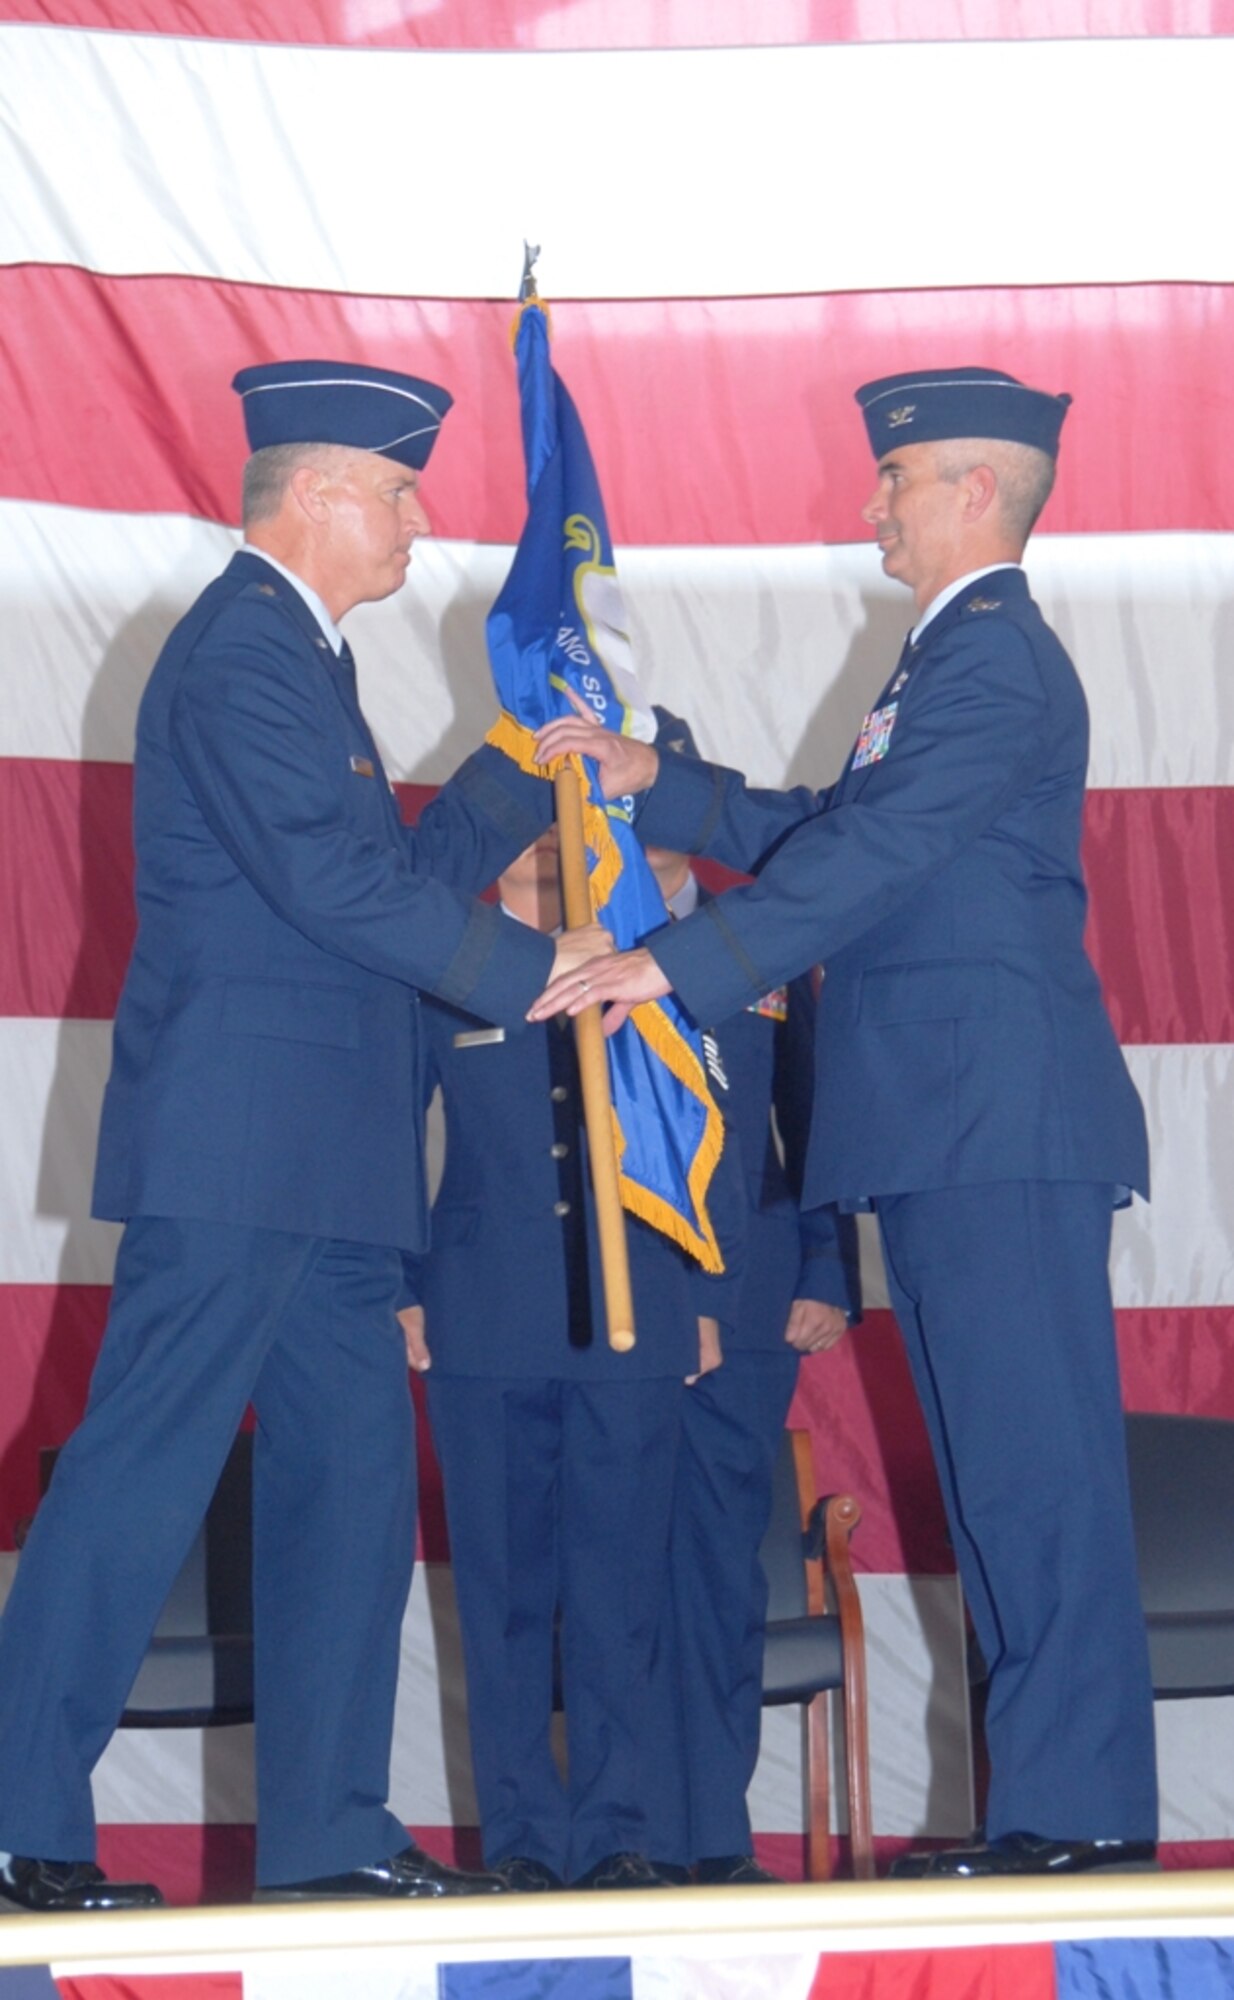 U.S. Air Force Brig. Gen. Joseph Balskus, left, passes the 101st Air and Space Operations Group (101st AOG) flag to Col. Thomas Cucchi during a change of command ceremony held here June 11, 2011. This was the very first change of command ceremony for the 101st AOG, which was officially activated July 1, 2009. (U.S. Air Force photo by Maj. Steve Burke/Released)